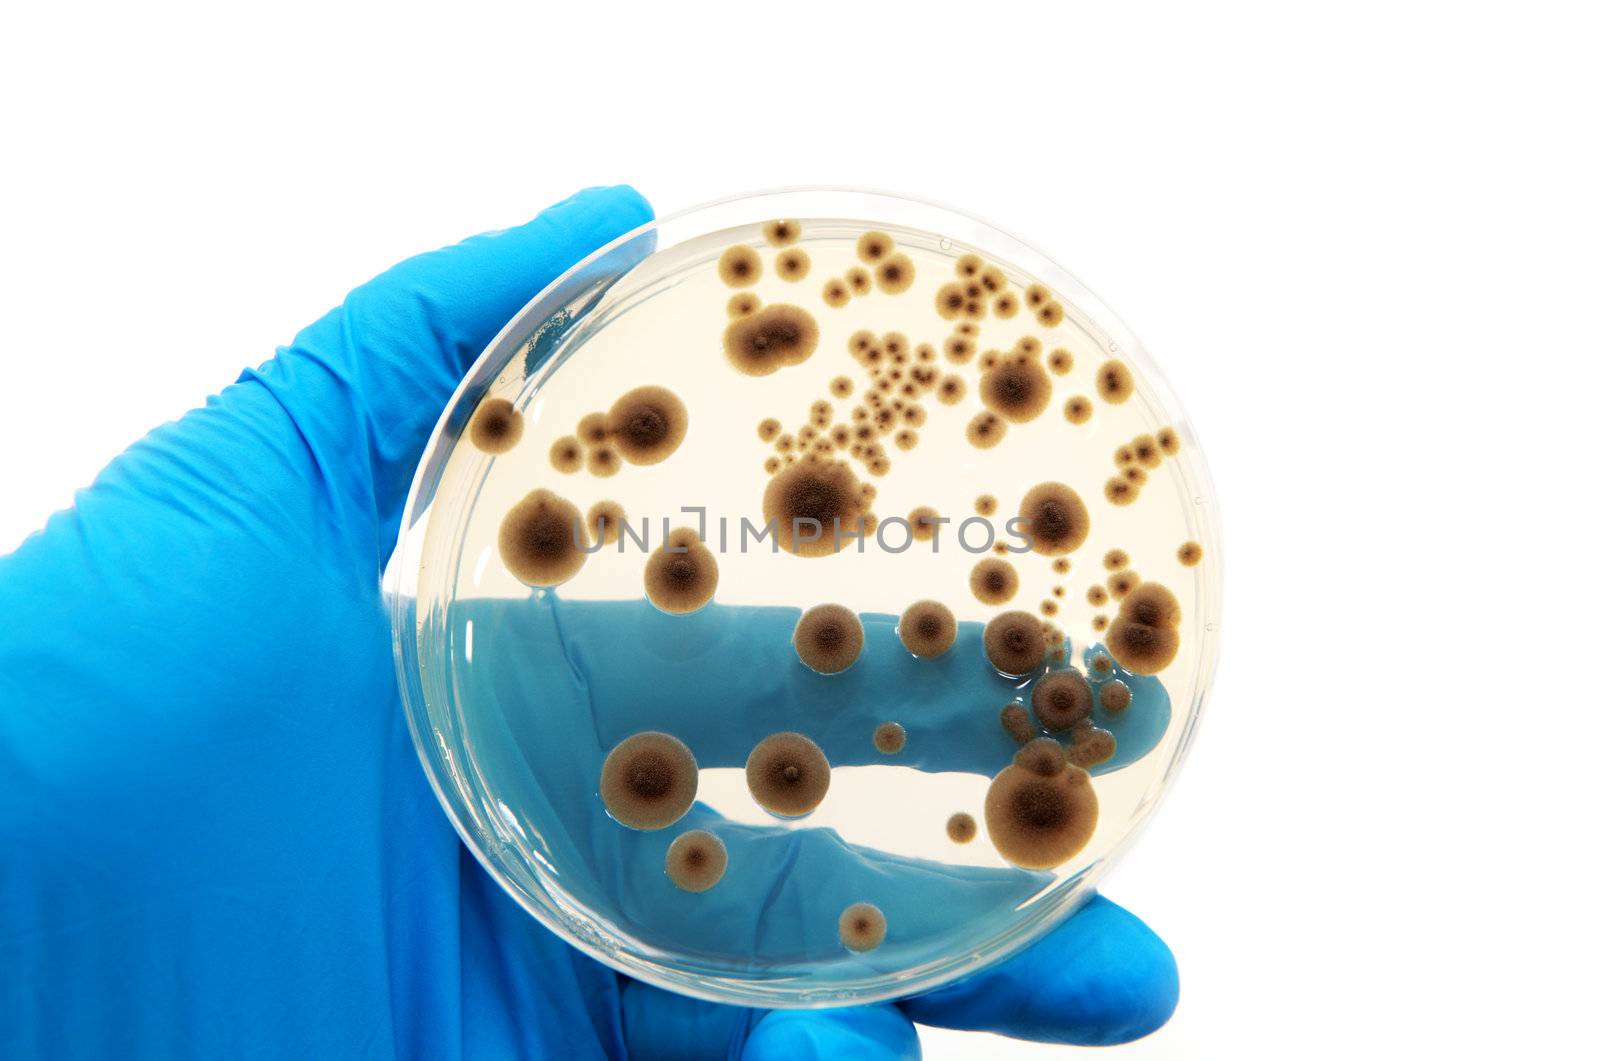 microorganisms on the agar plate by catolla